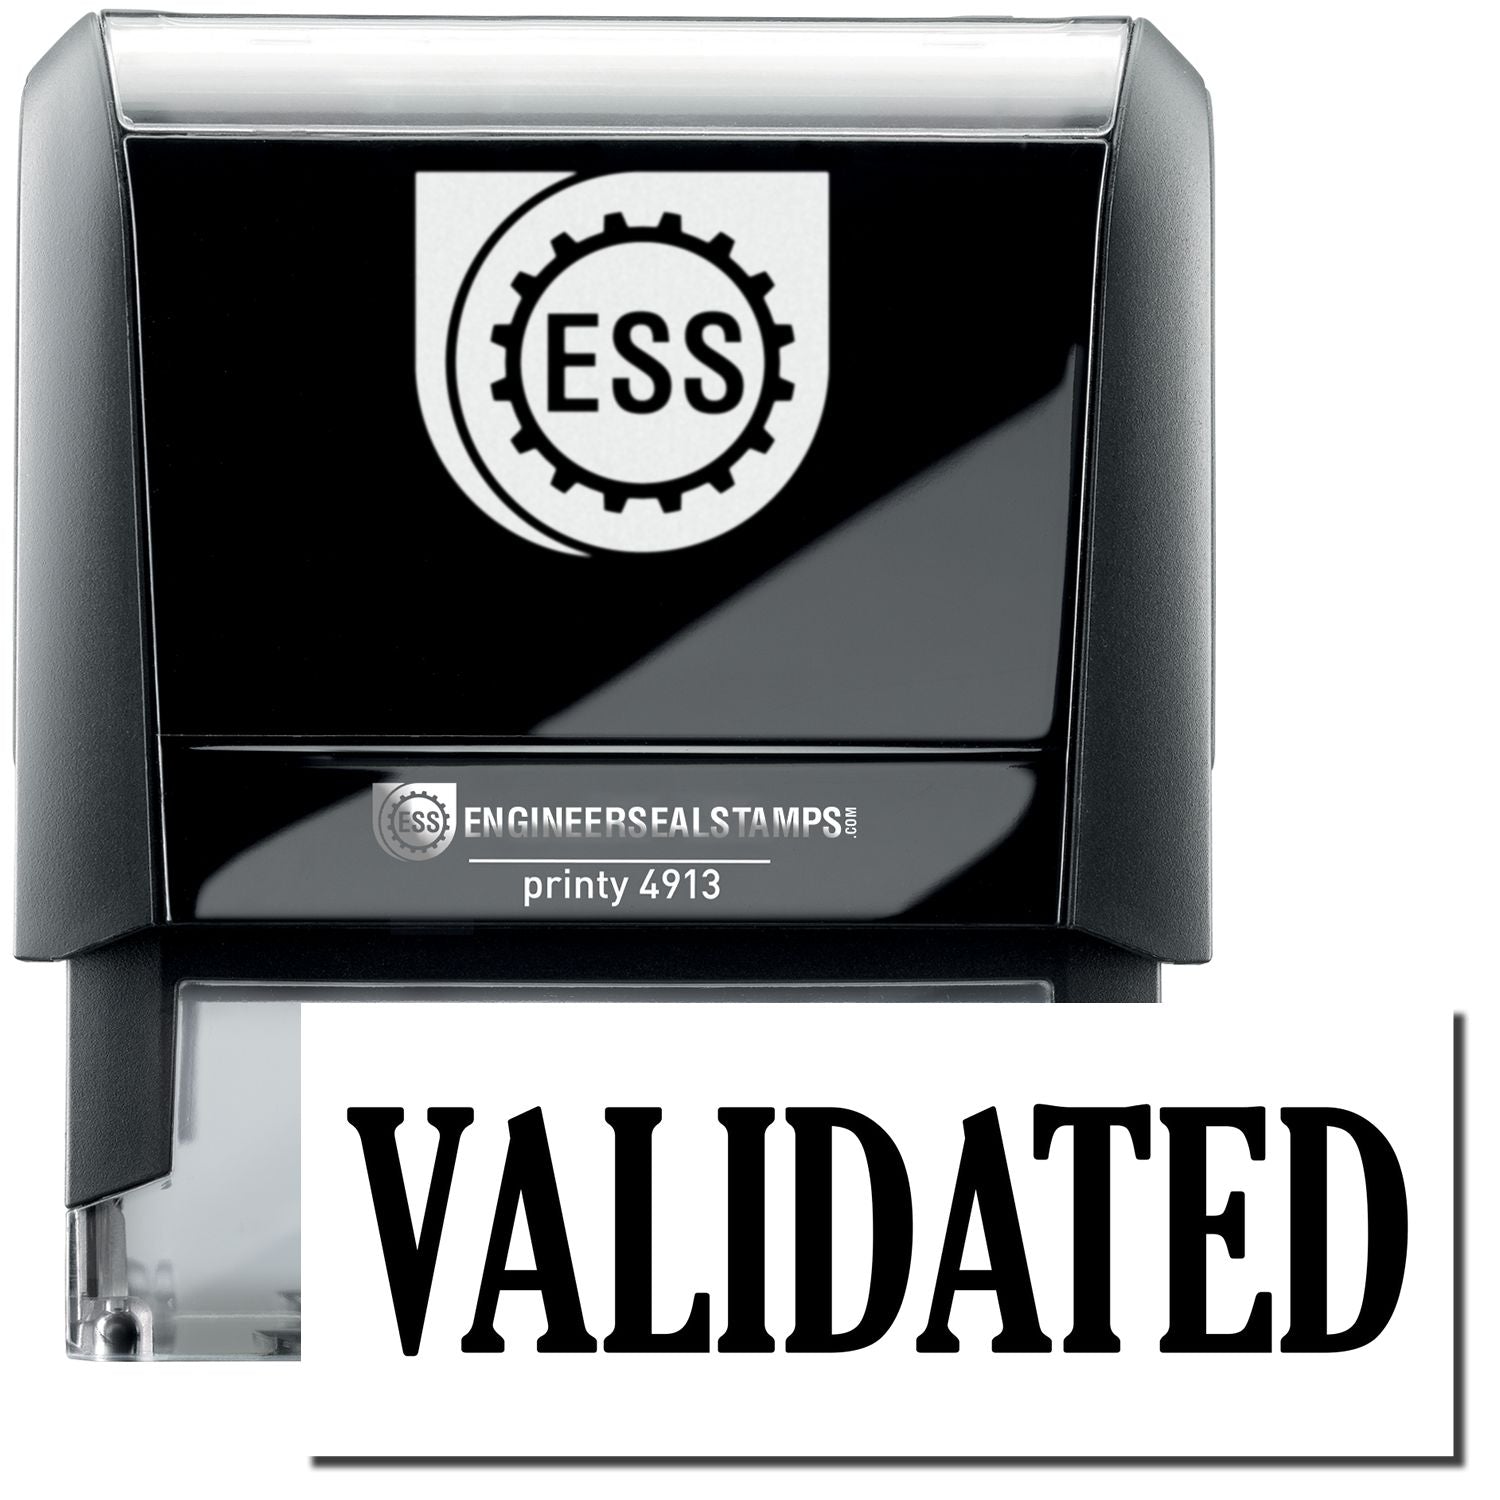 A self-inking stamp with a stamped image showing how the text "VALIDATED" in a large bold font is displayed by it.